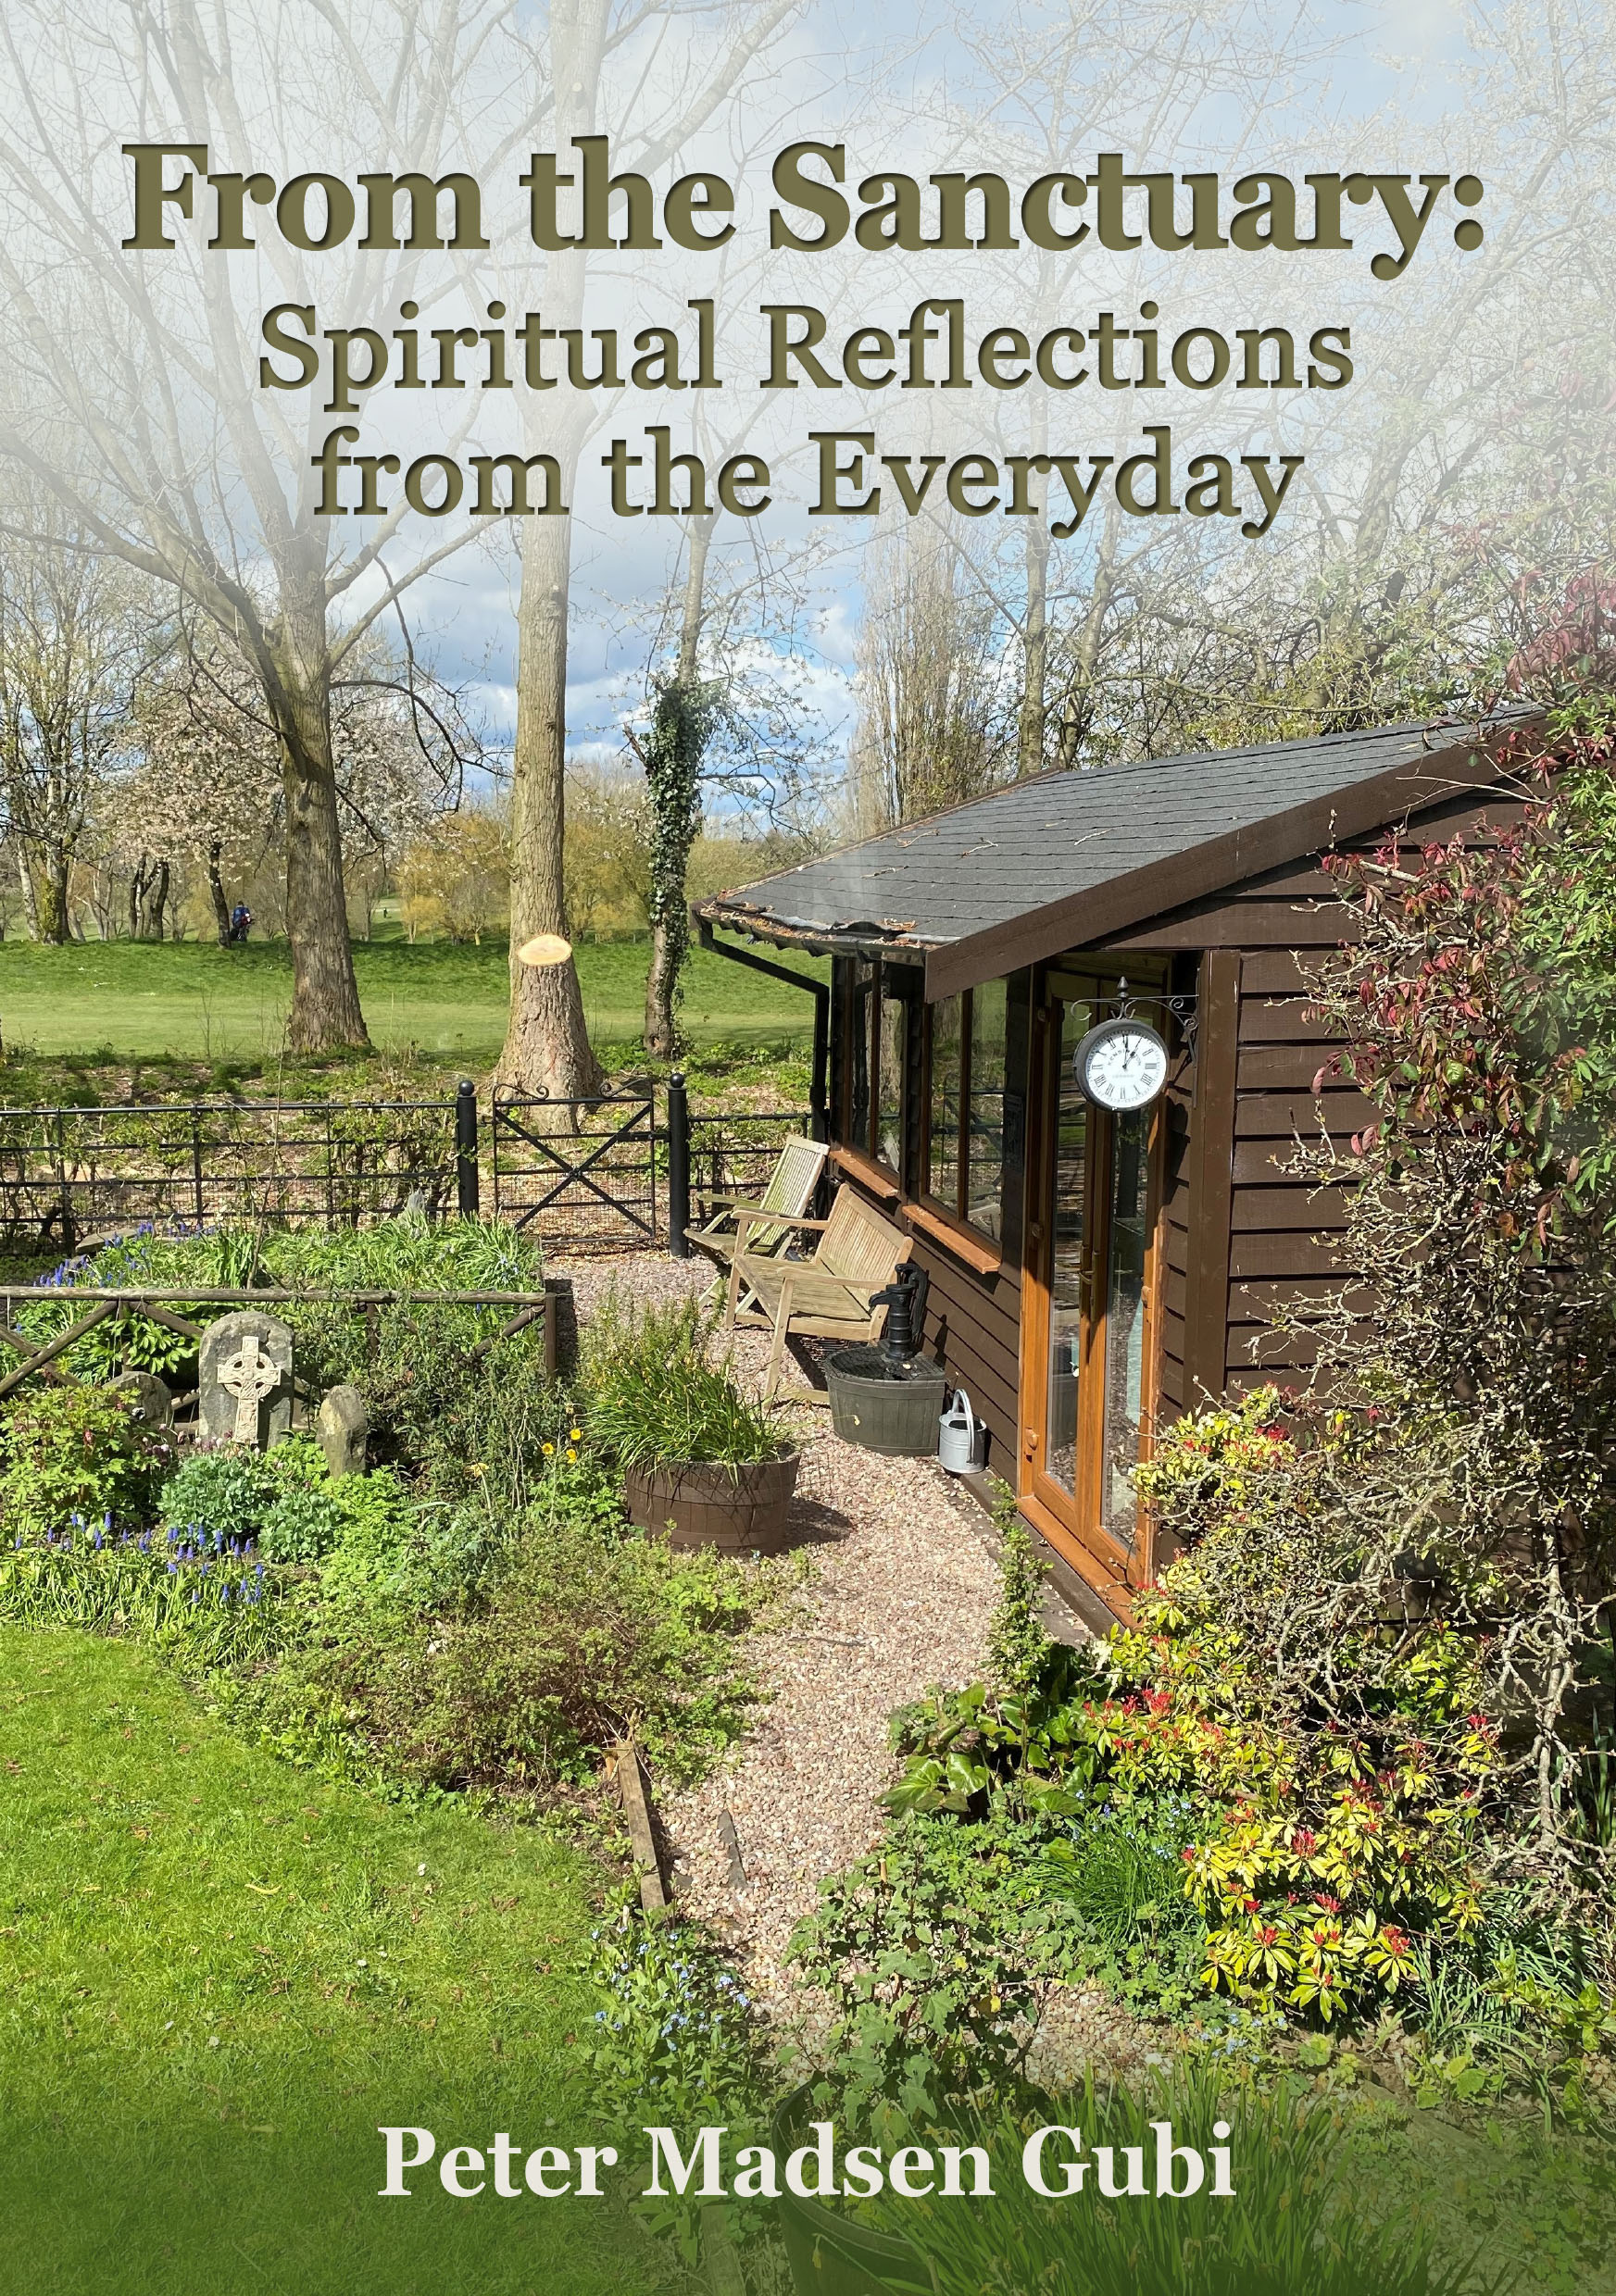 From the Sanctuary: Spiritual Reflections from the Everyday